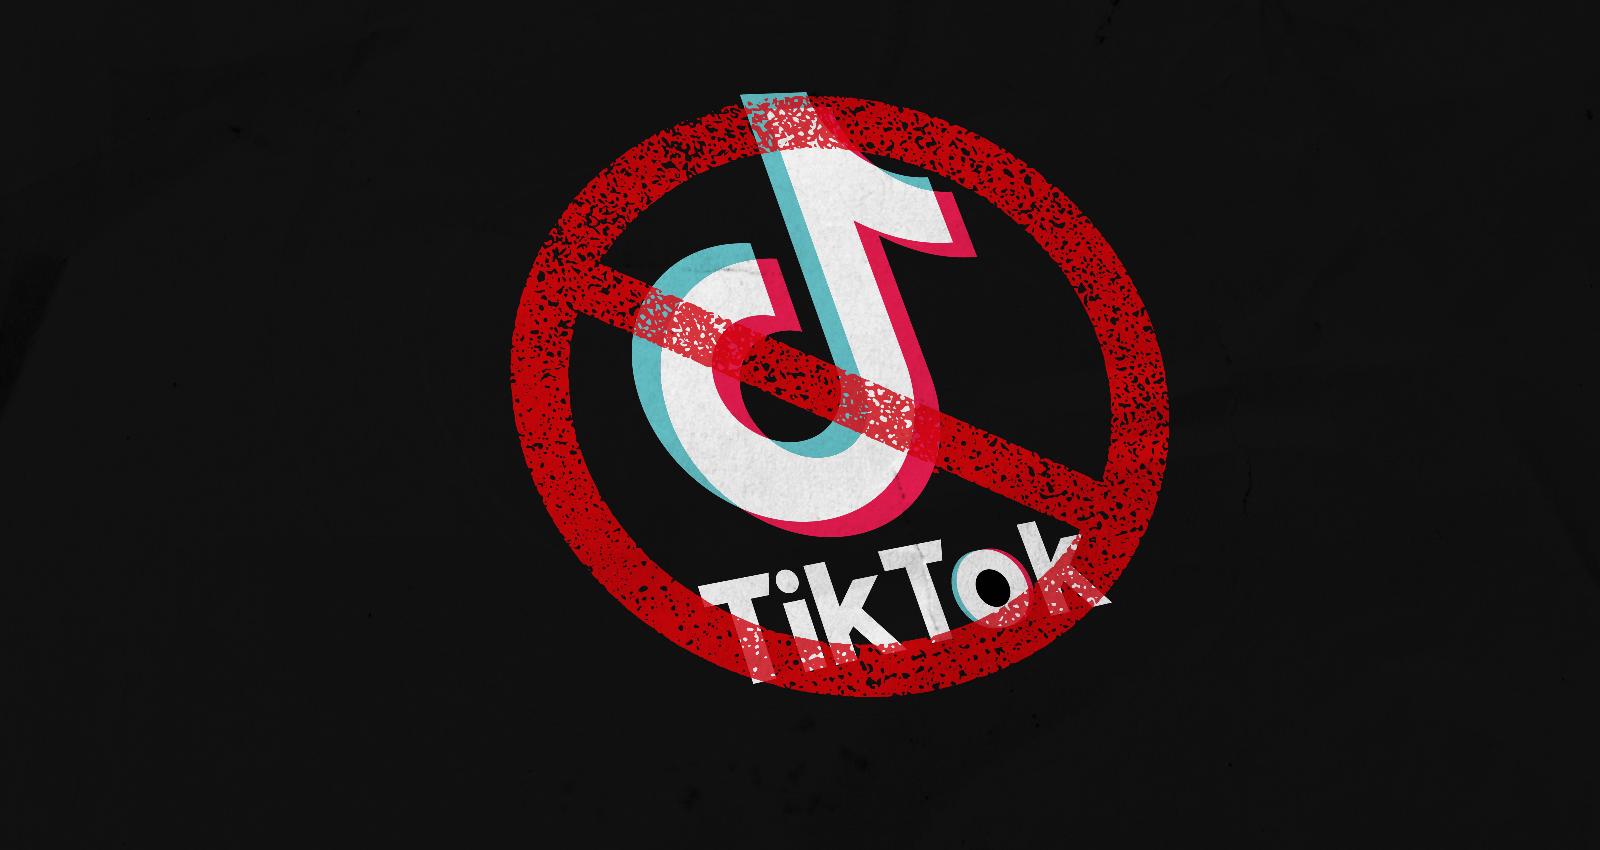 Some IRS employees still access TikTok despite ban on government devices